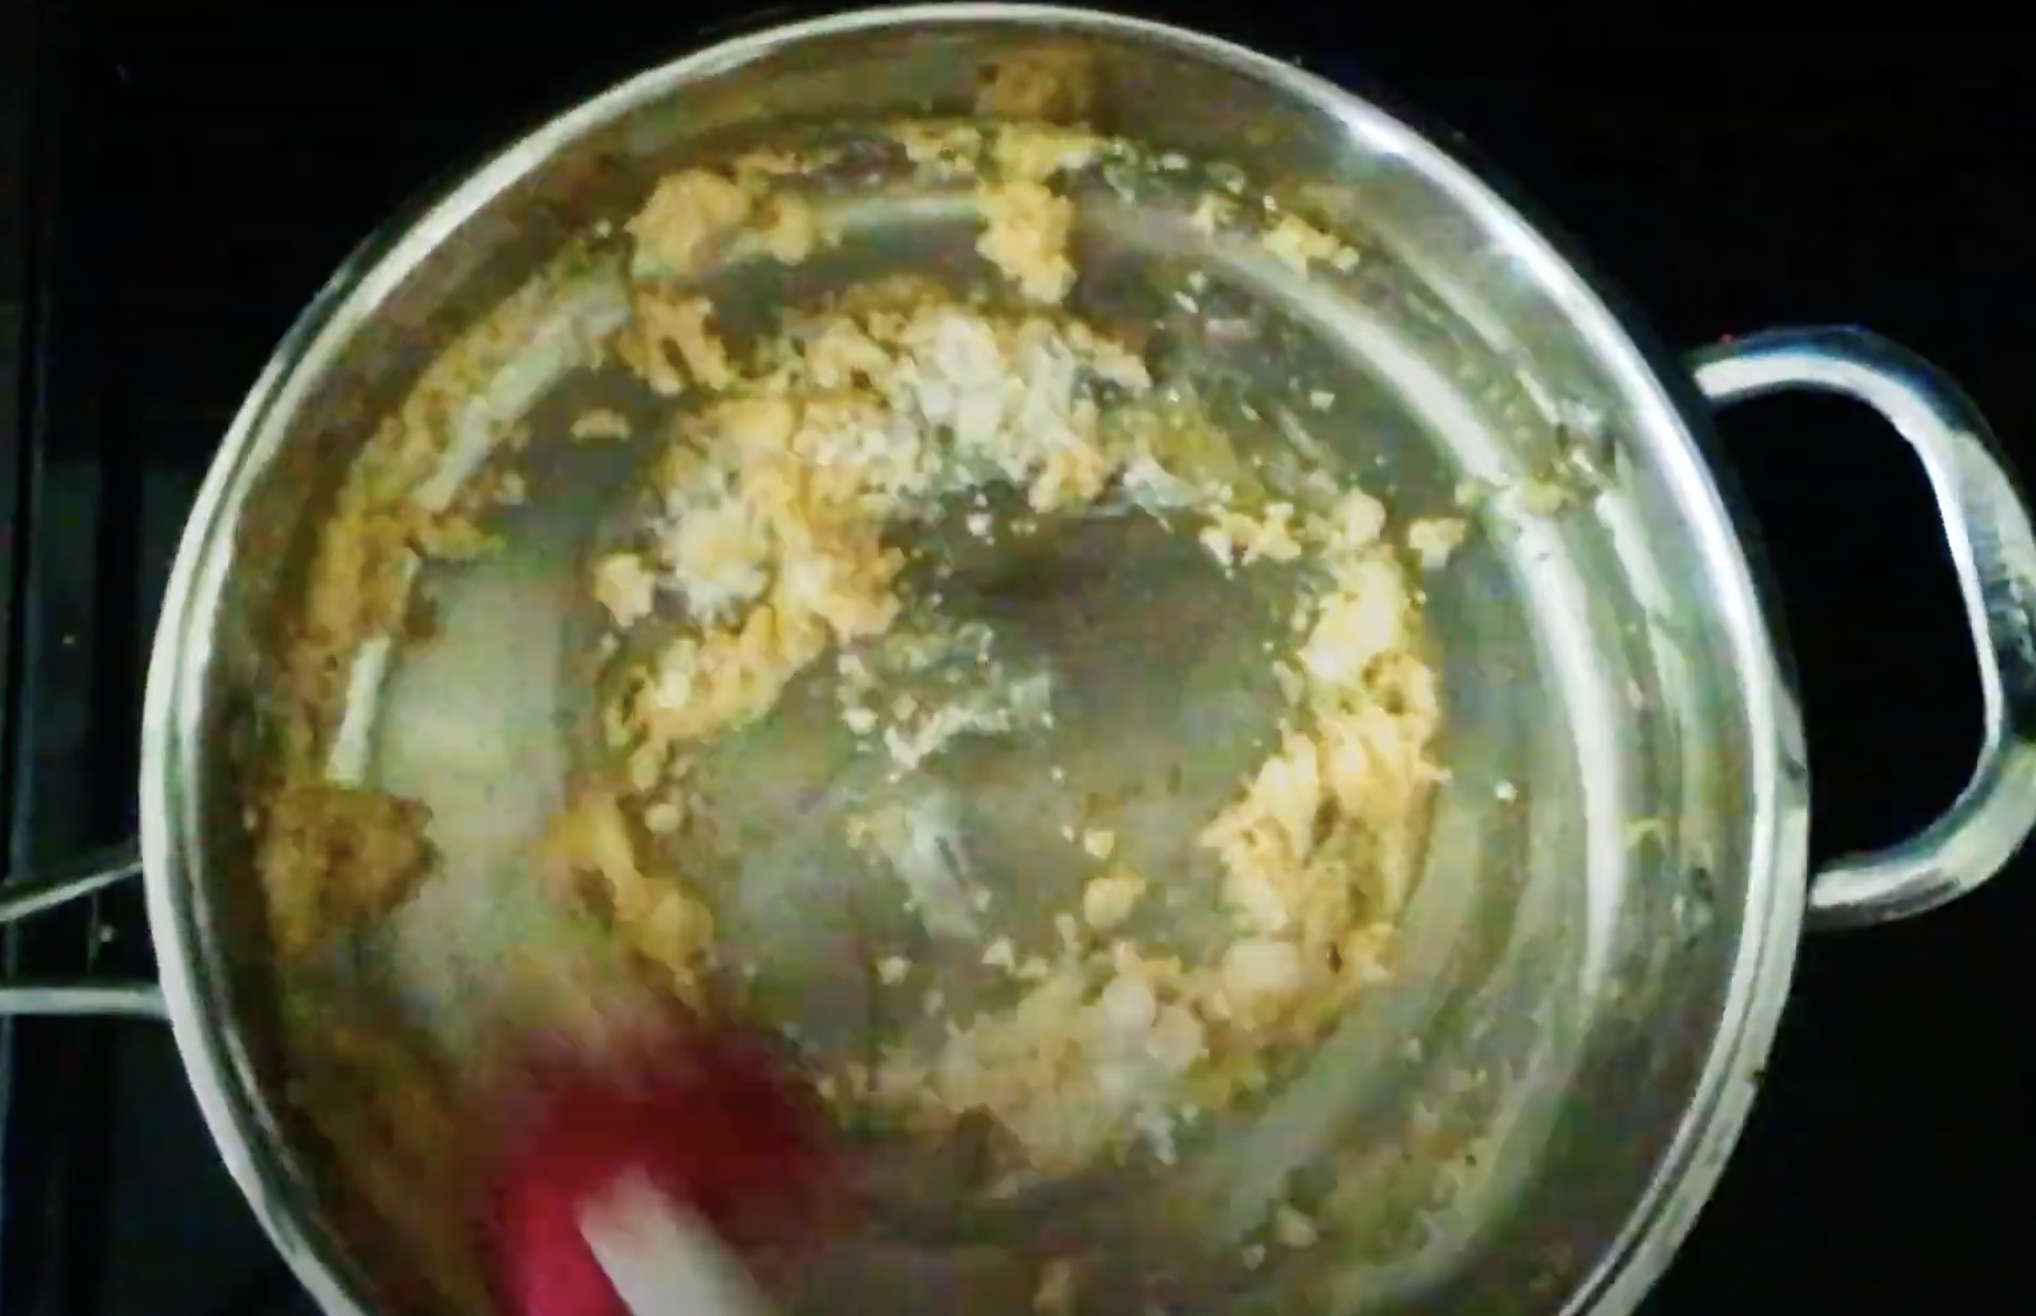 A roux being formed out of melted butter and flour in a skillet